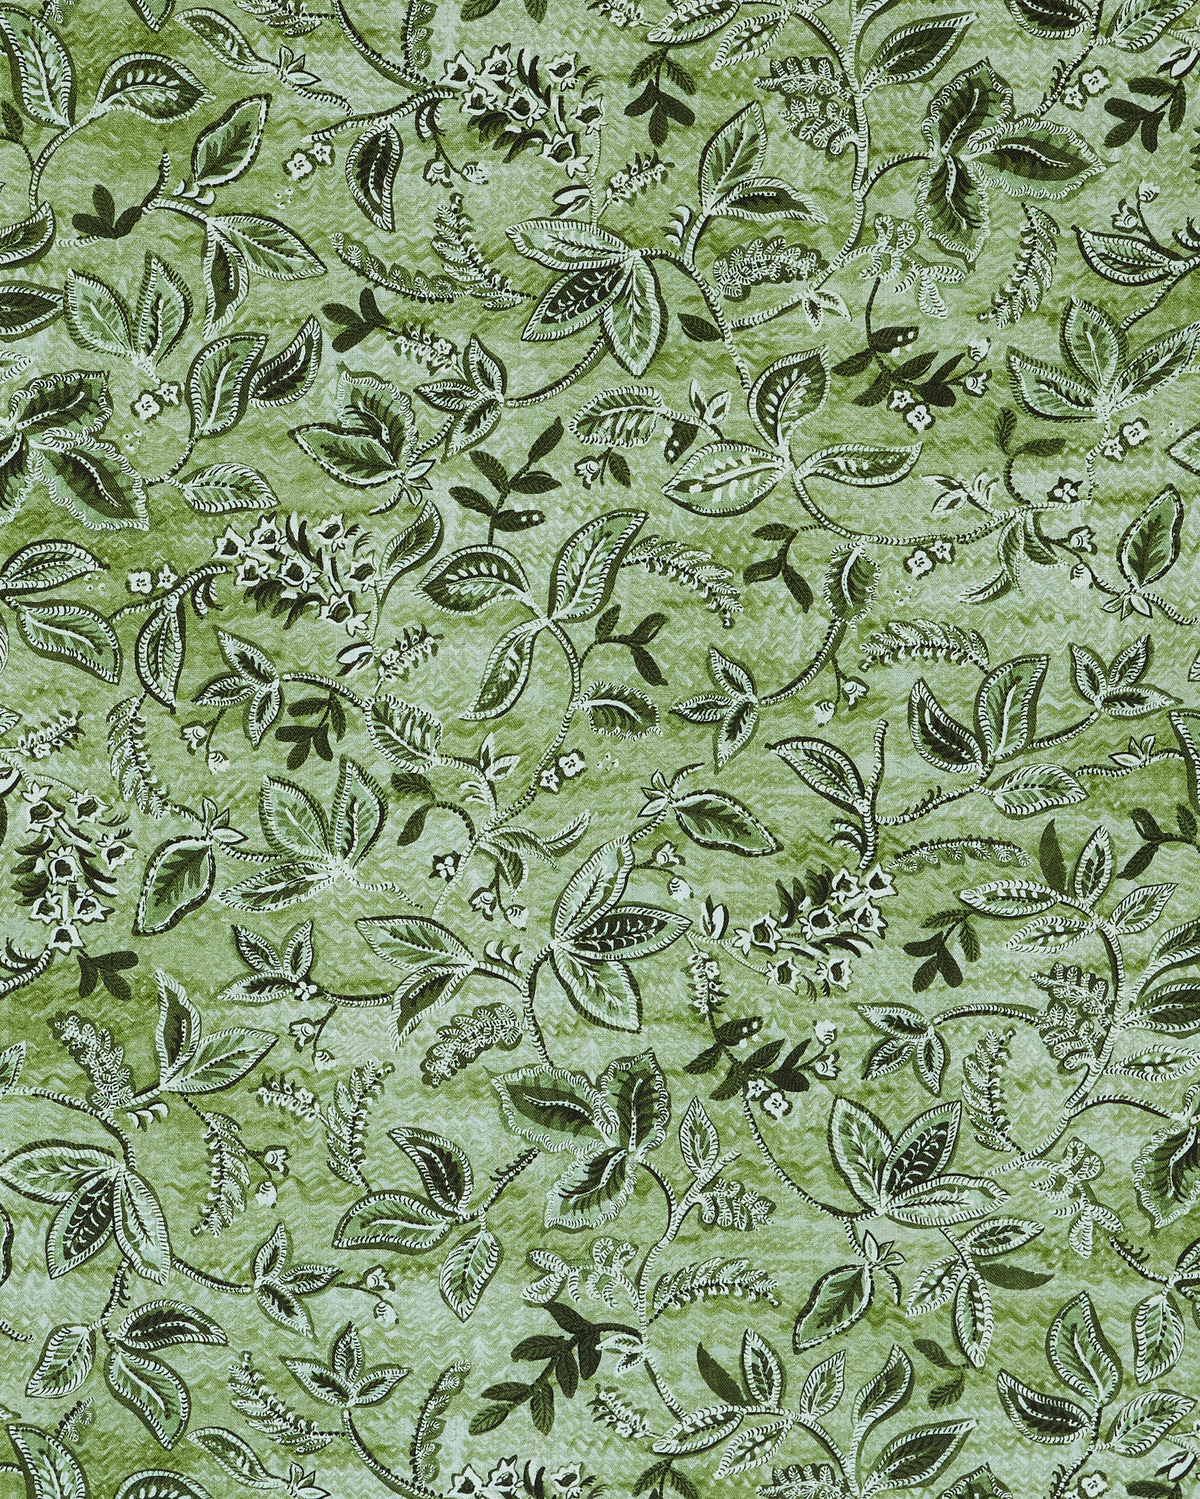 Textured Botanical Fabric in Green